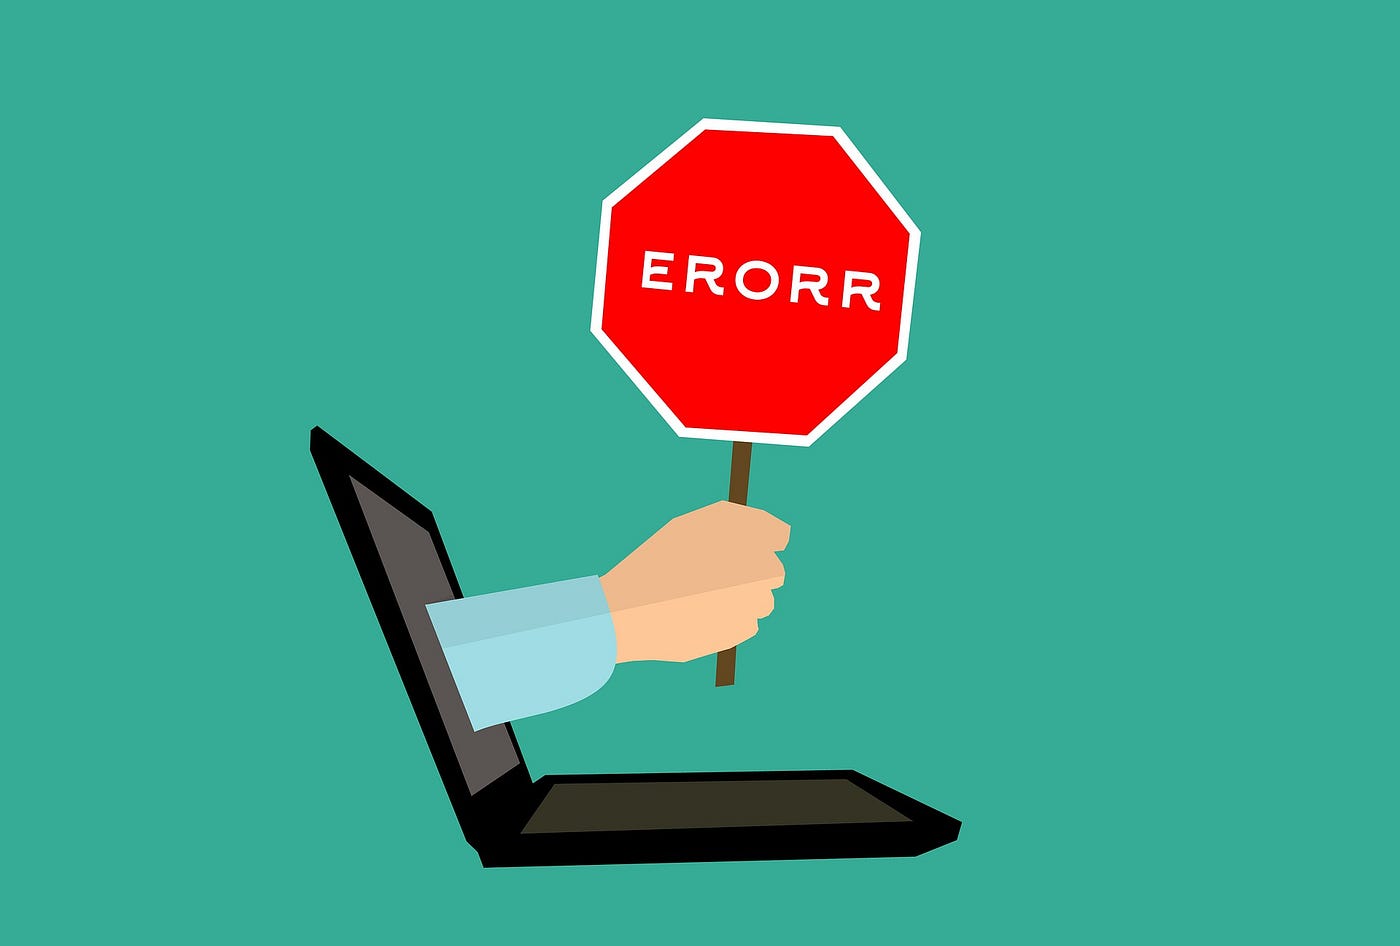 Checking Automated Data Analysis for Errors  by Peter Grant